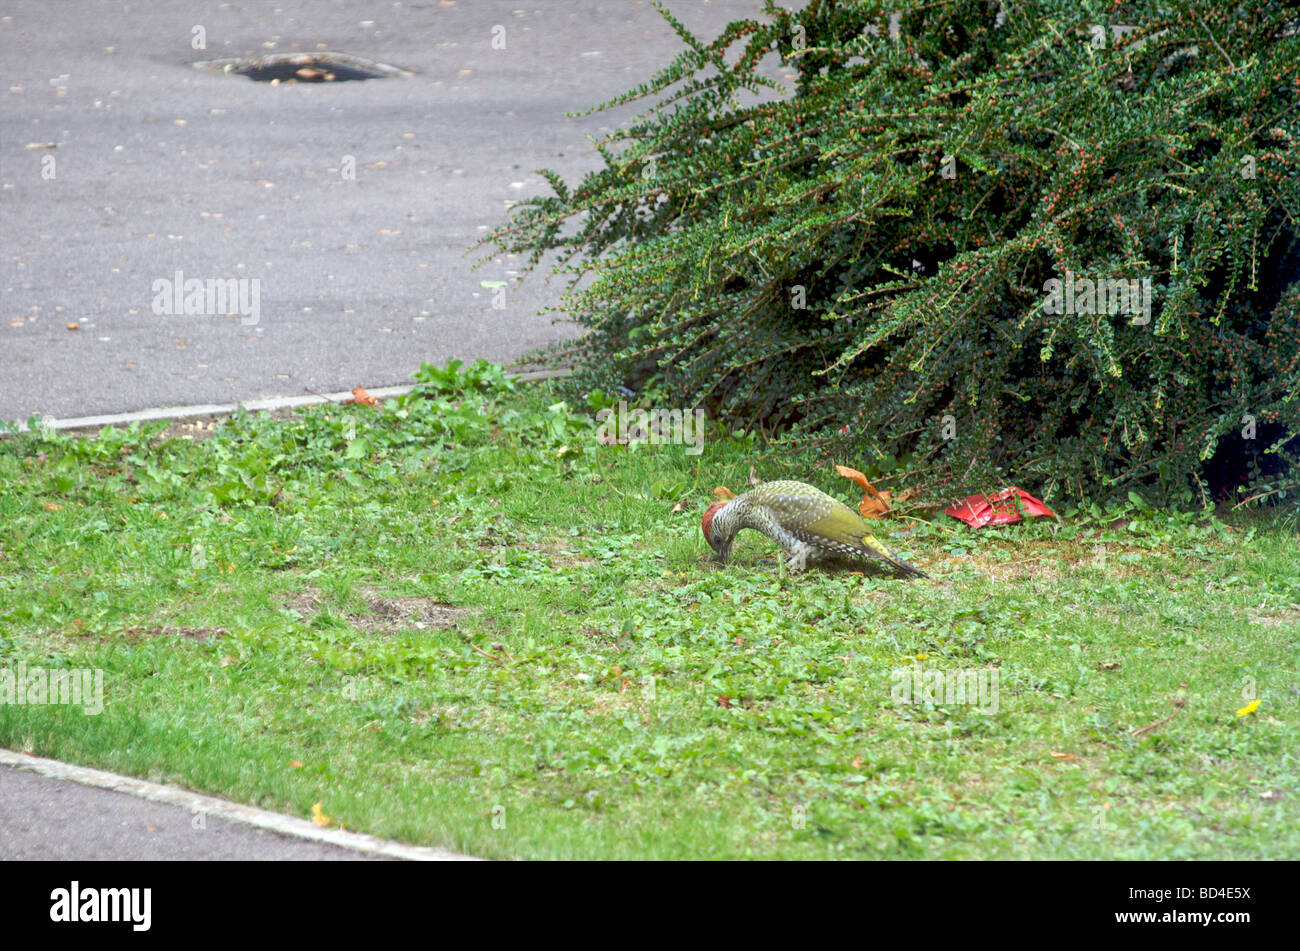 A juvenile Green Woodpecker forages for food on the grass verge at the side of the road Stock Photo